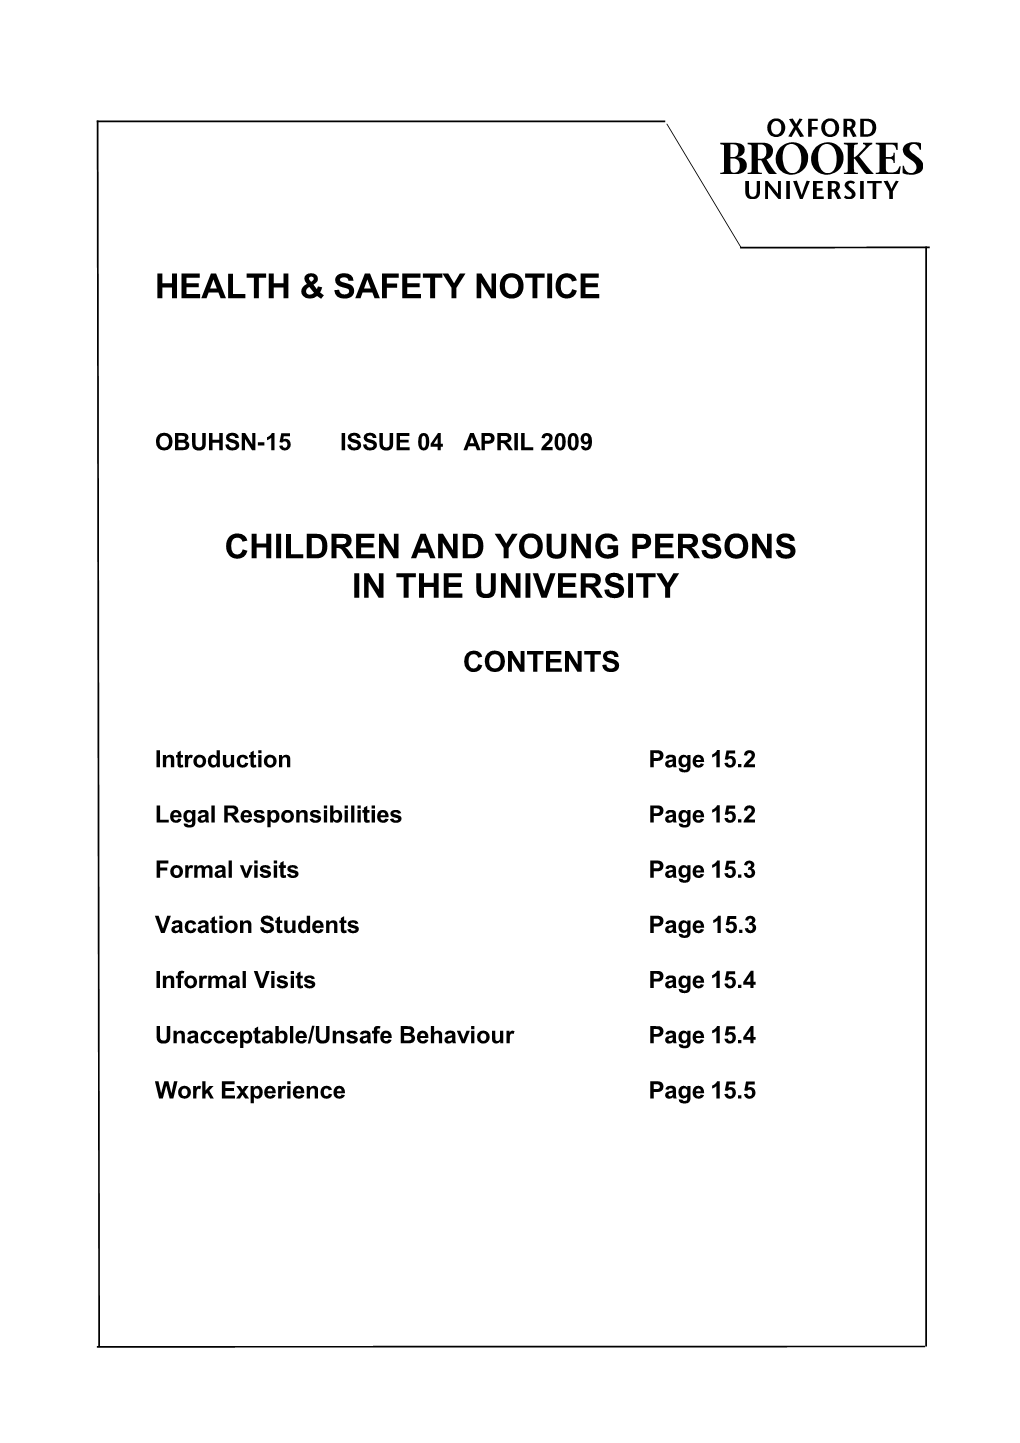 Children and Young Persons